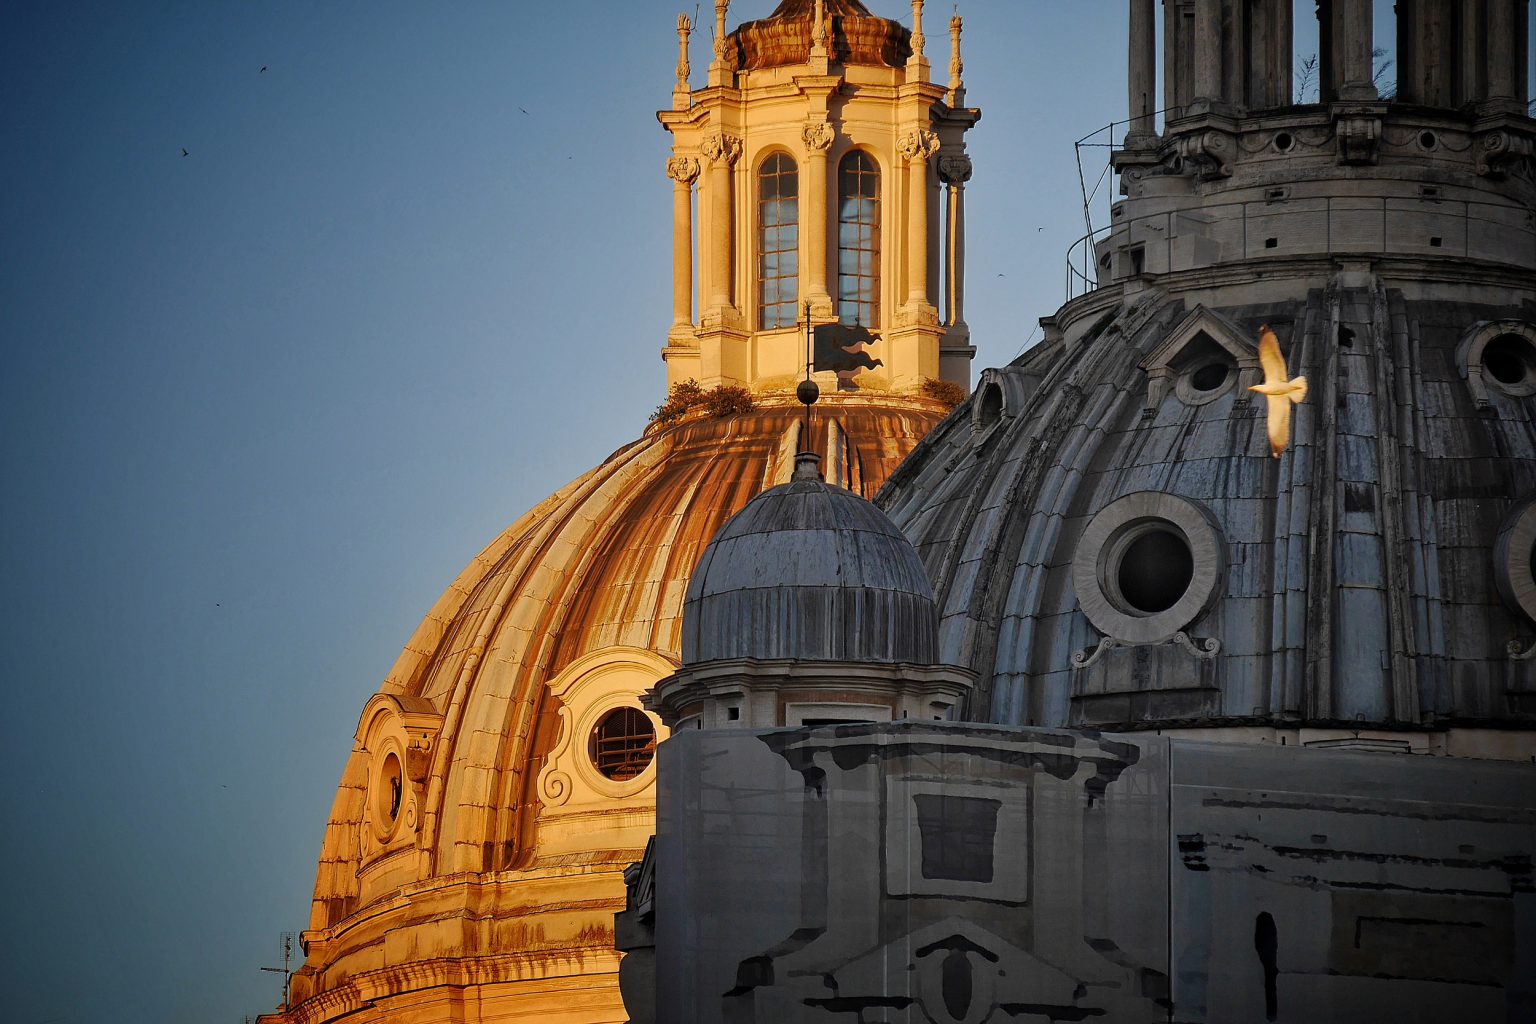 Photograph of domes in Rome